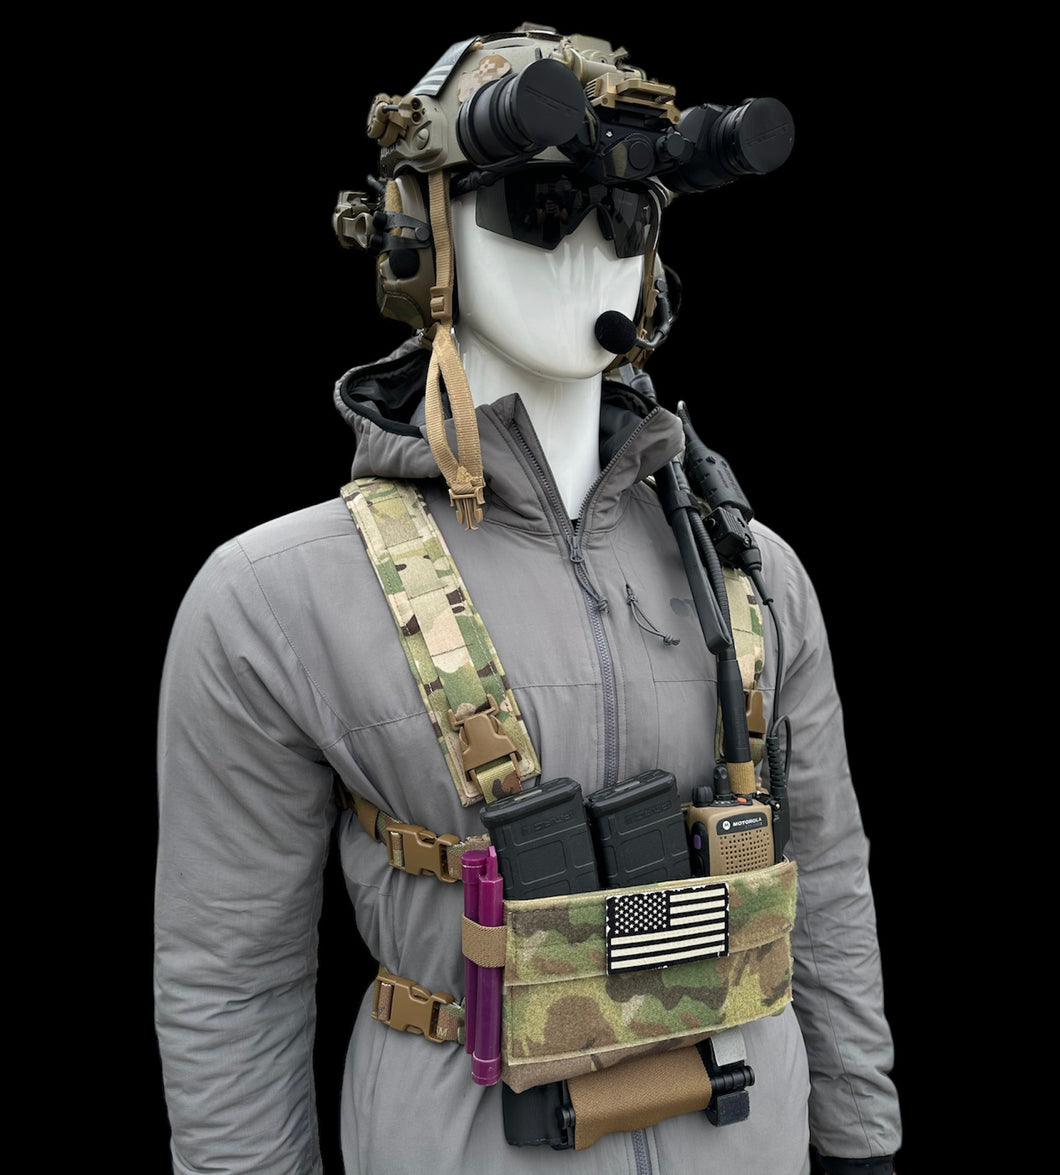 Lowpro Kit – Tracer Tactical